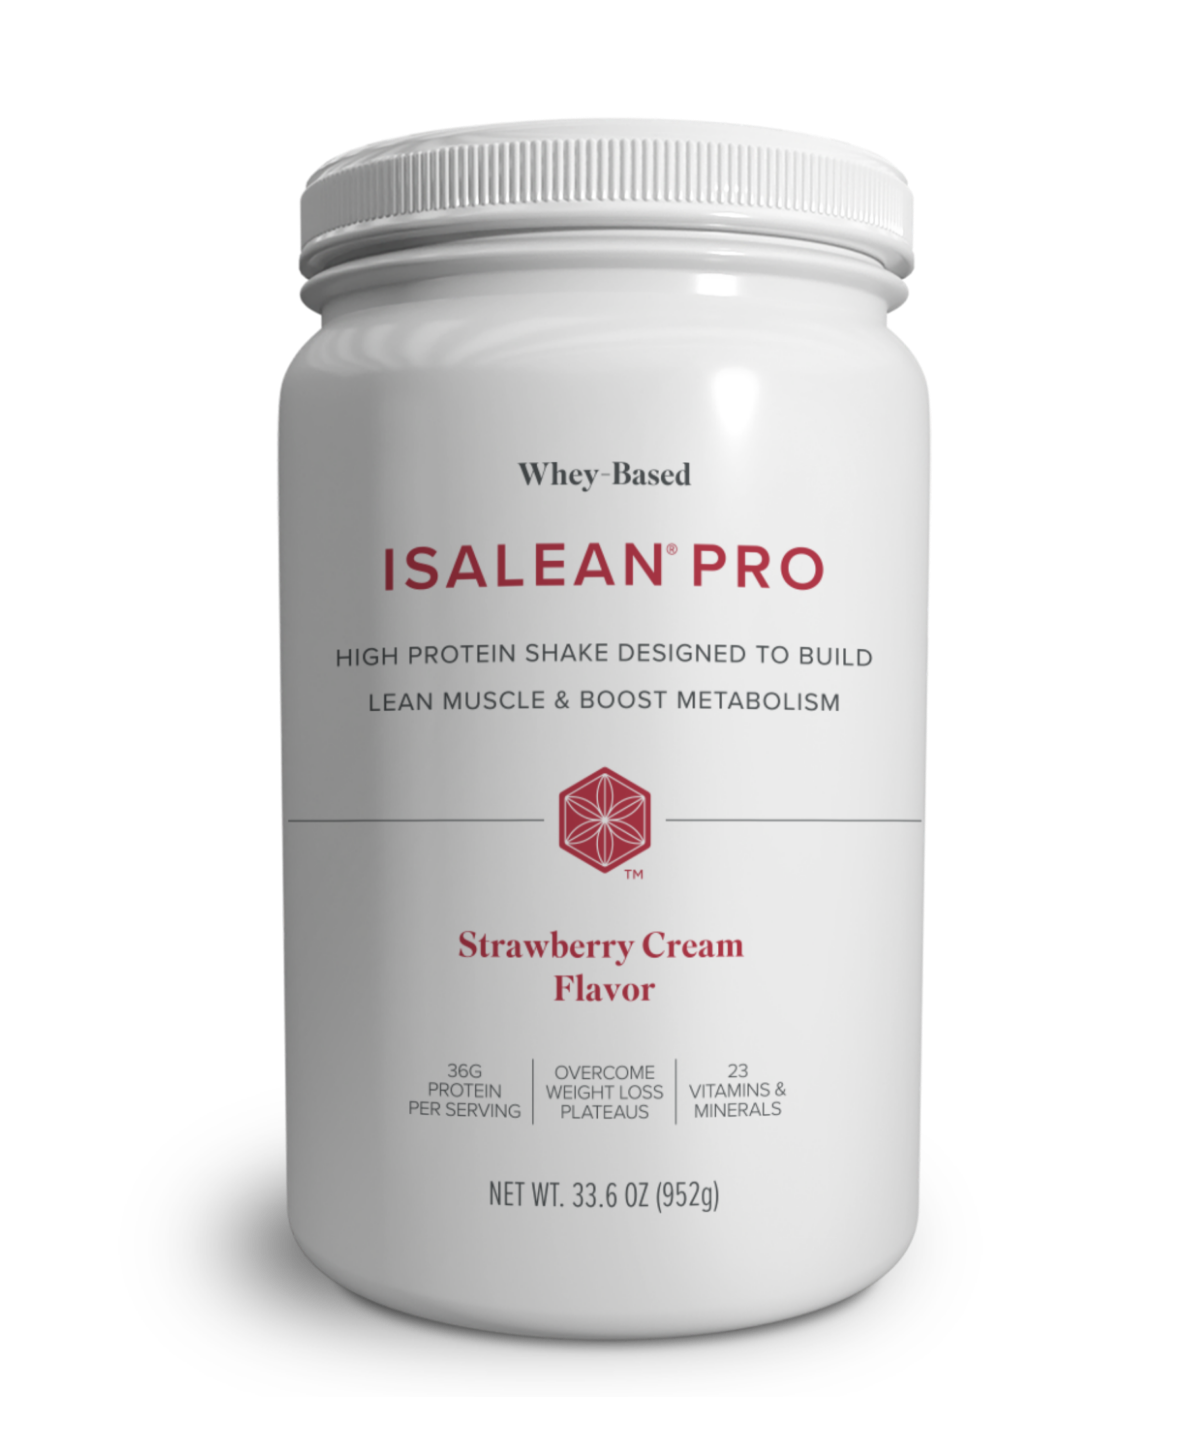 IsaLean Protein Superfood Shake in Various Options